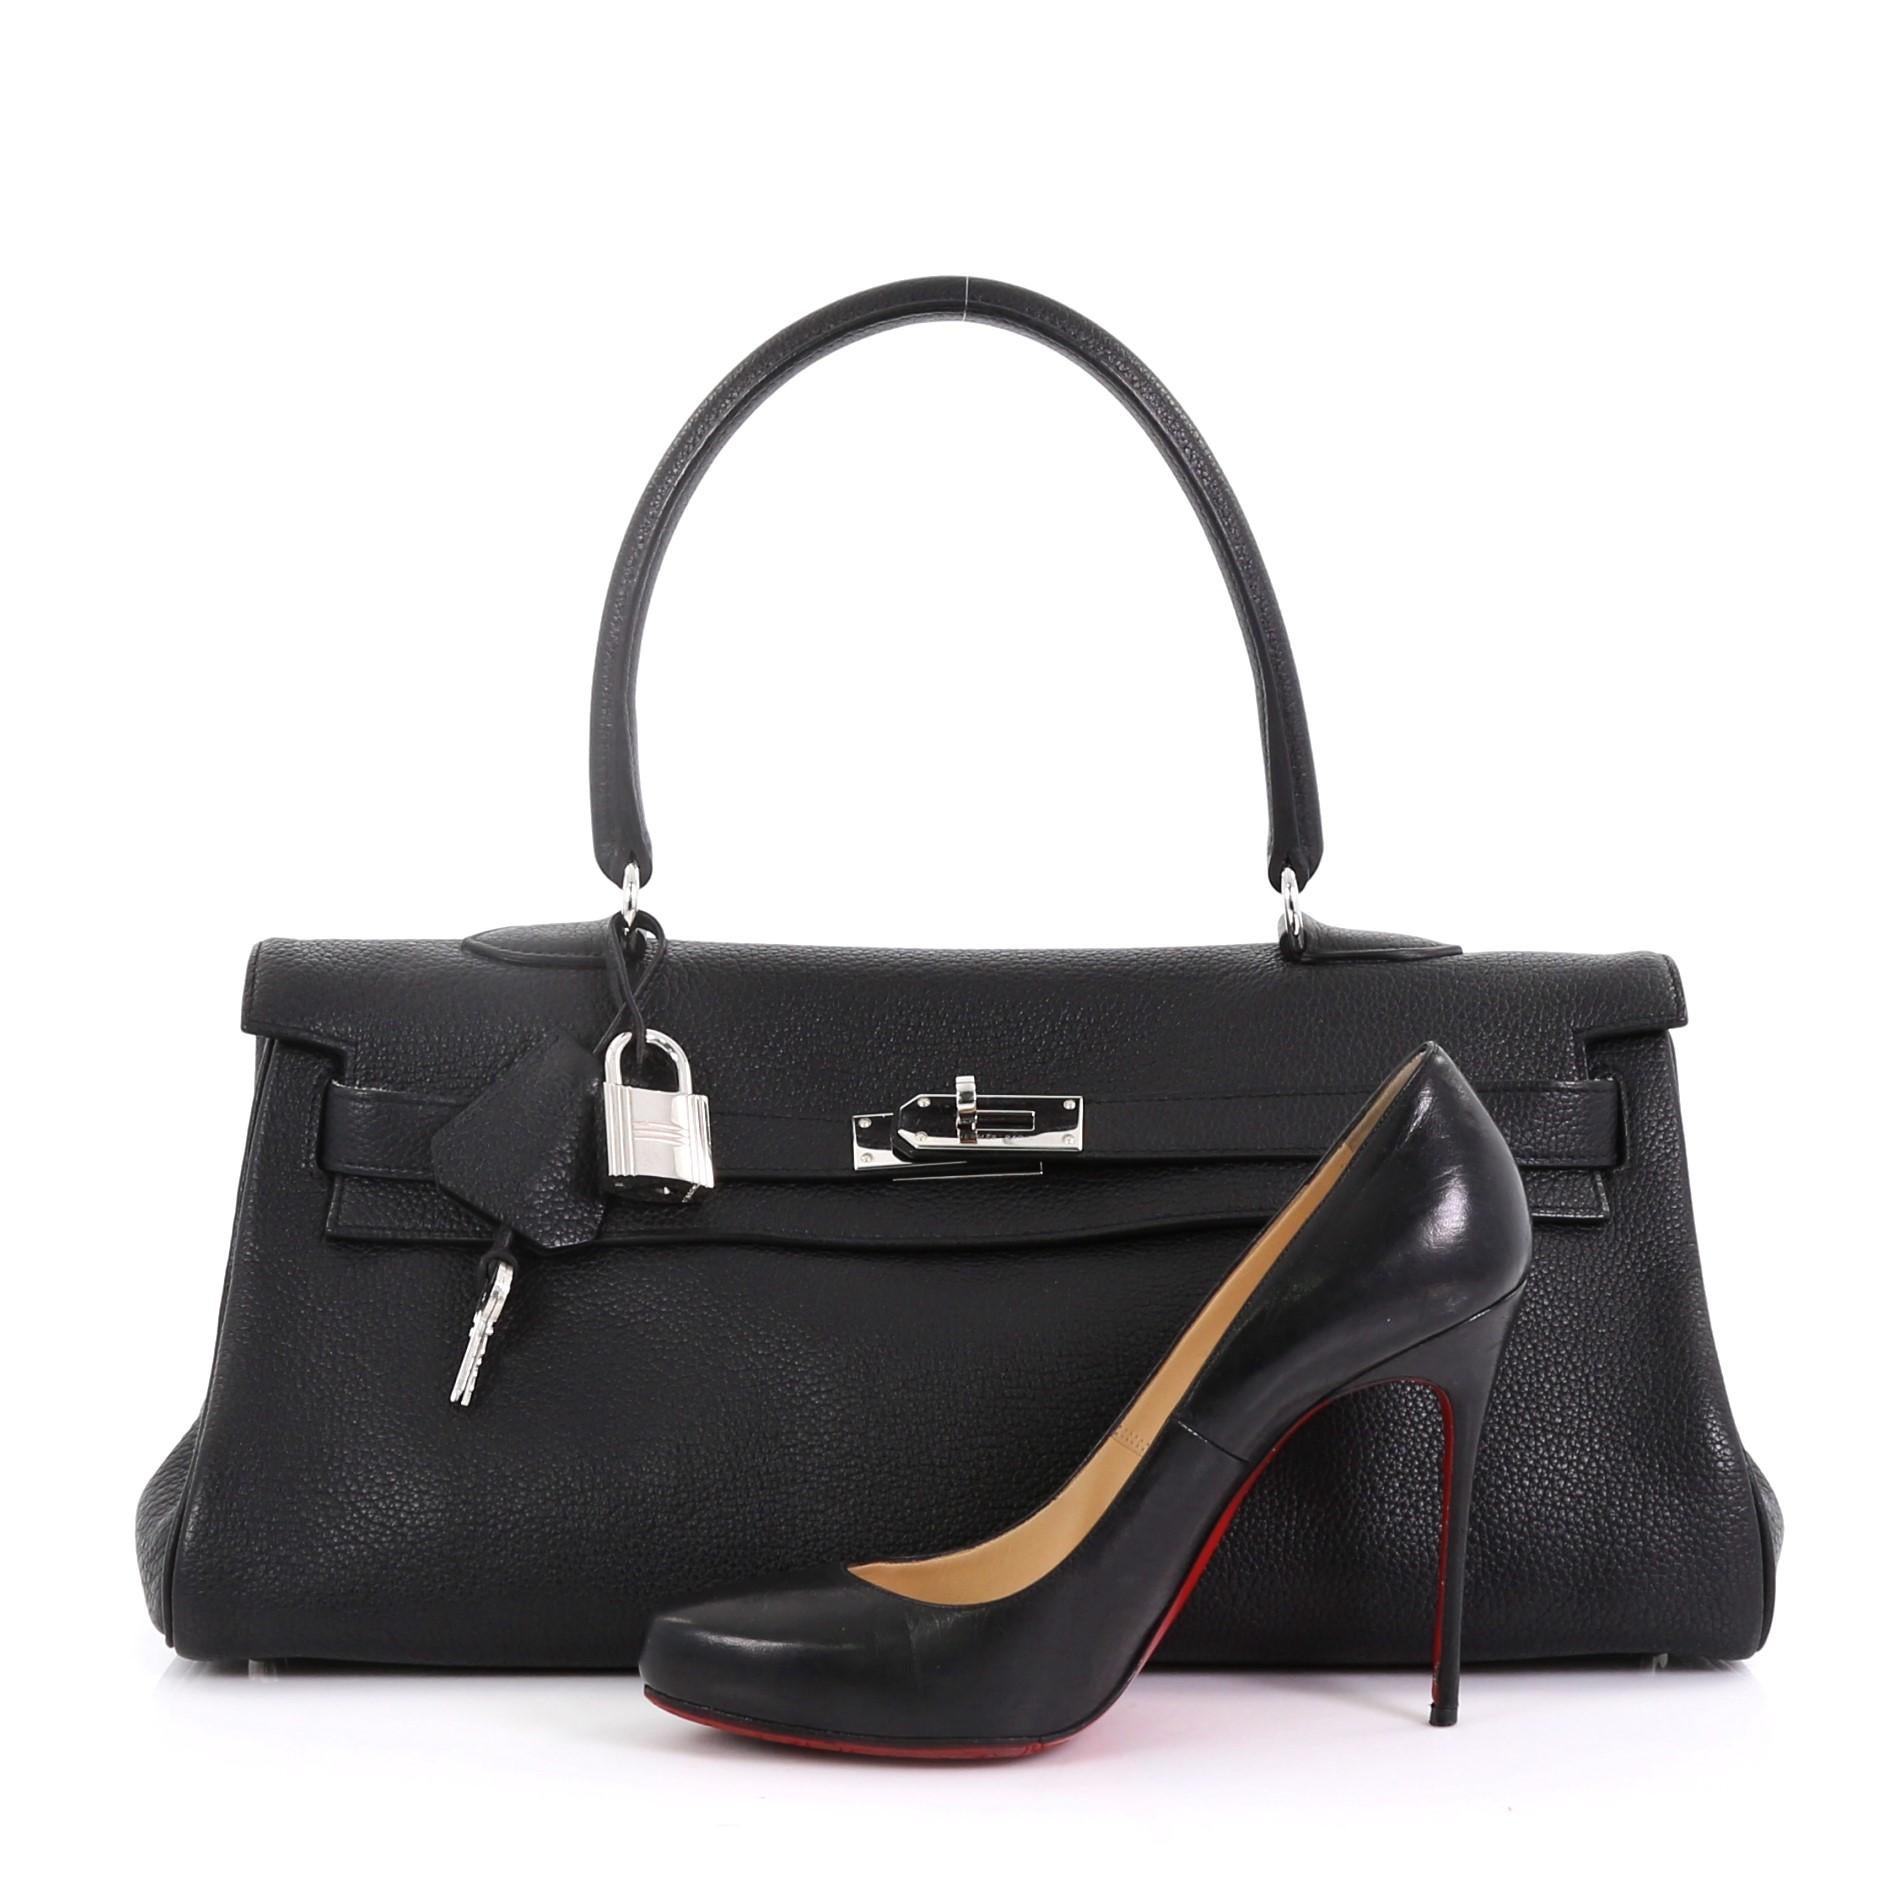 This Hermes Shoulder Kelly Handbag Clemence 42, crafted in Noir black Clemence leather, features single rolled top handle, a frontal flap, and palladium hardware interior. Its turn-lock closure opens to a Noir black Clemence leather interior with